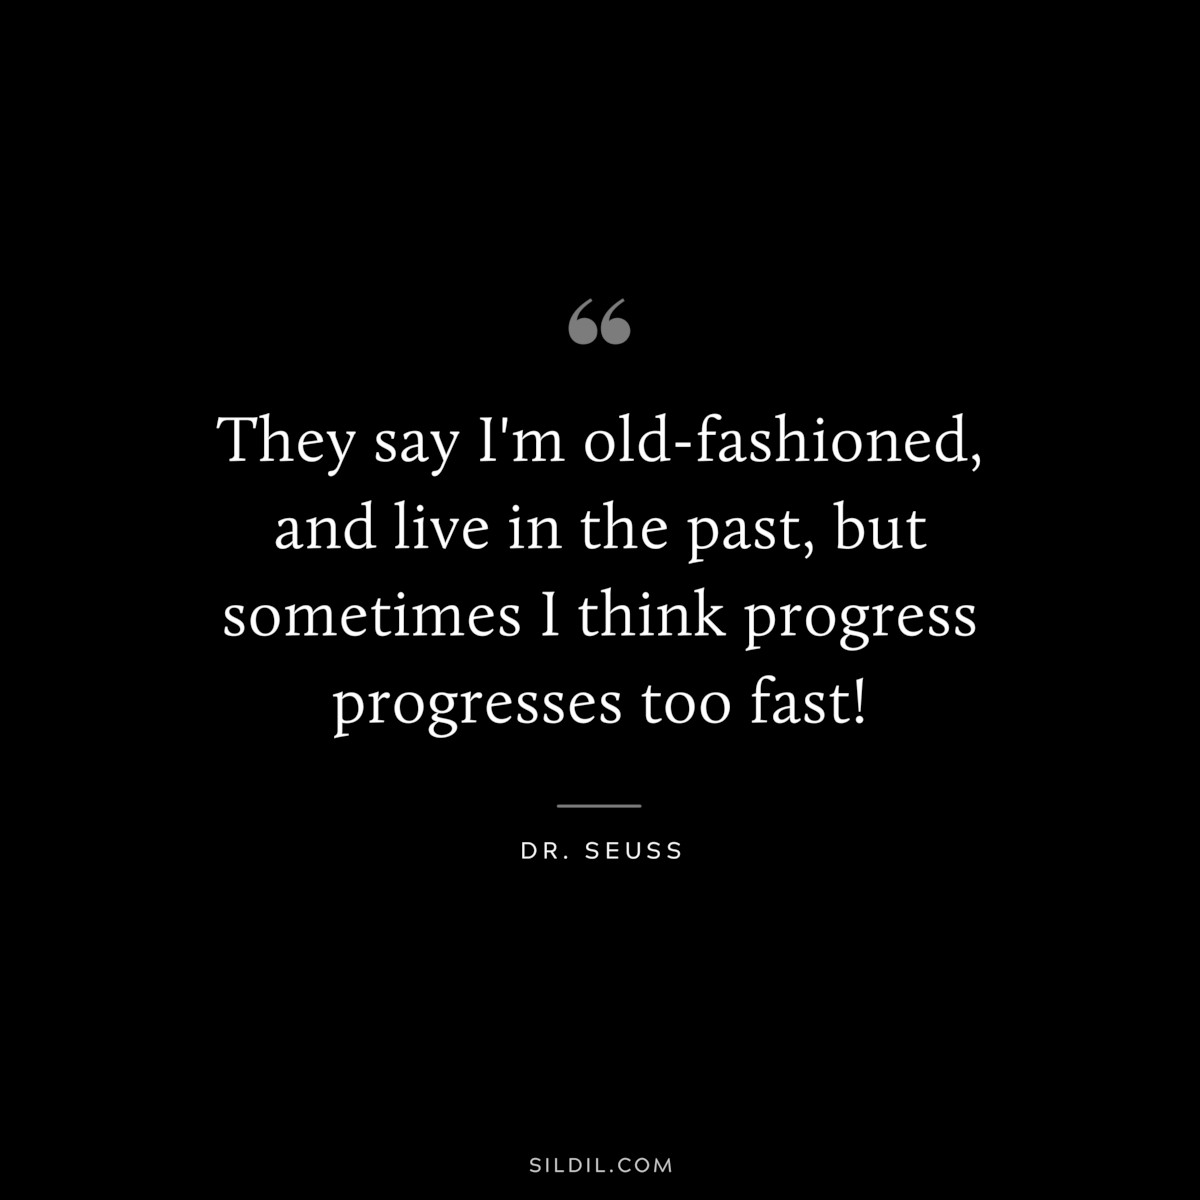 They say I'm old-fashioned, and live in the past, but sometimes I think progress progresses too fast! ― Dr. Seuss